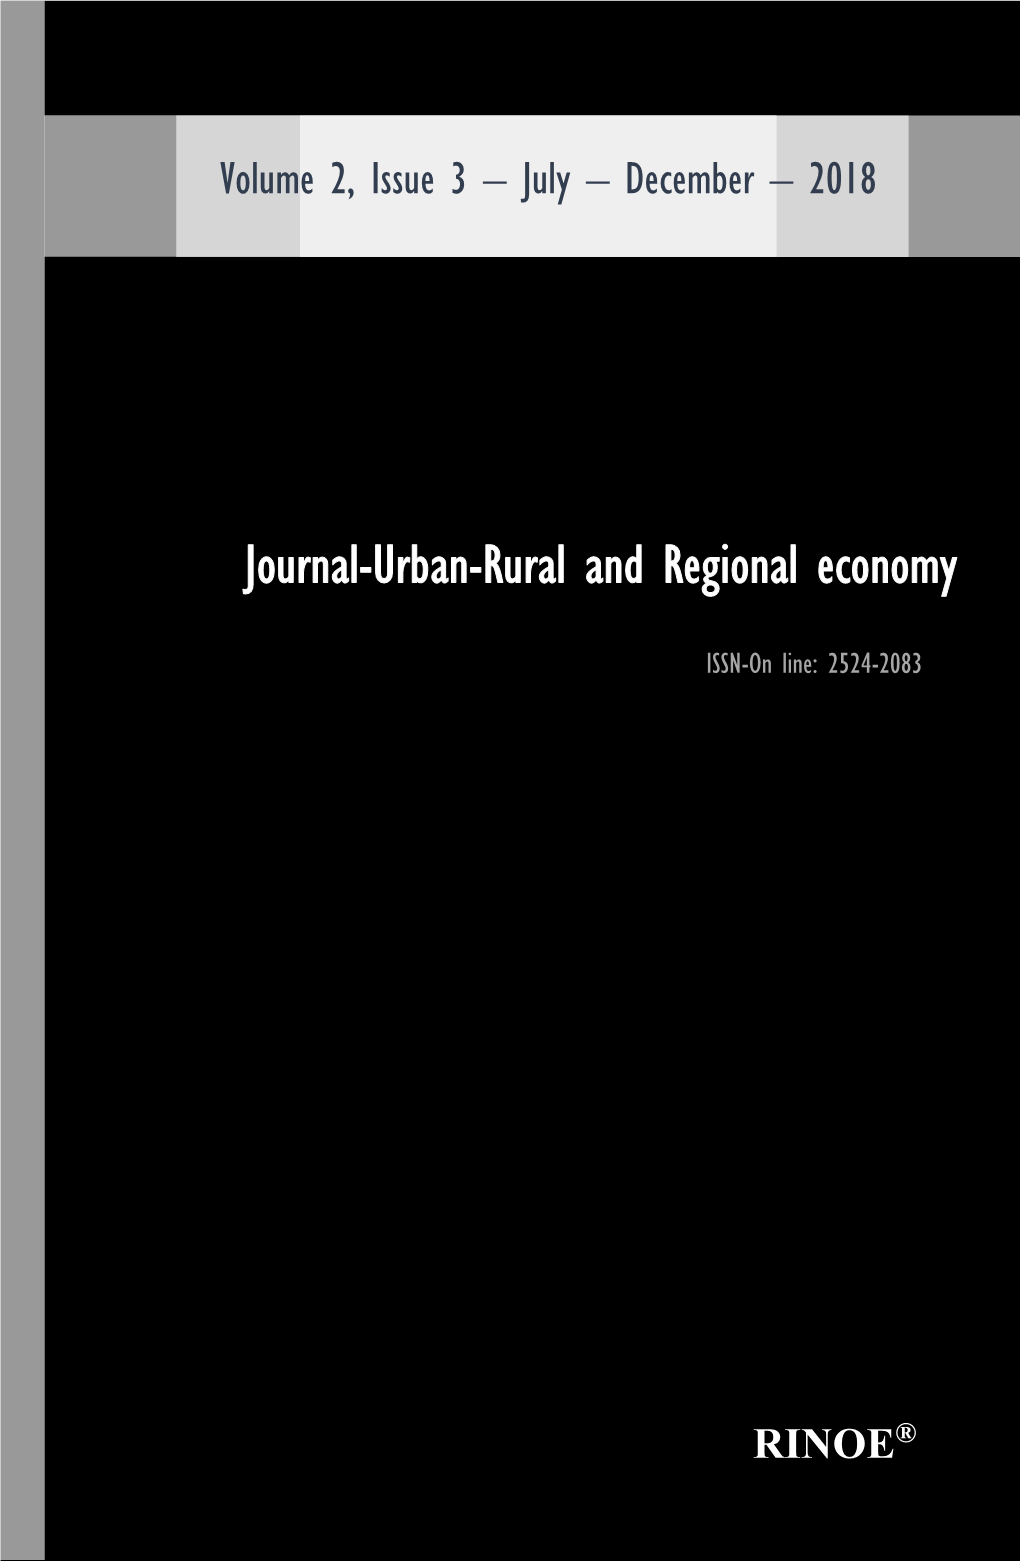 Journal-Urban-Rural and Regional Economy, Volume 2, Issue 3, July-December Chief Editor 2018, Is a Journal Edited Semestral by RINOE